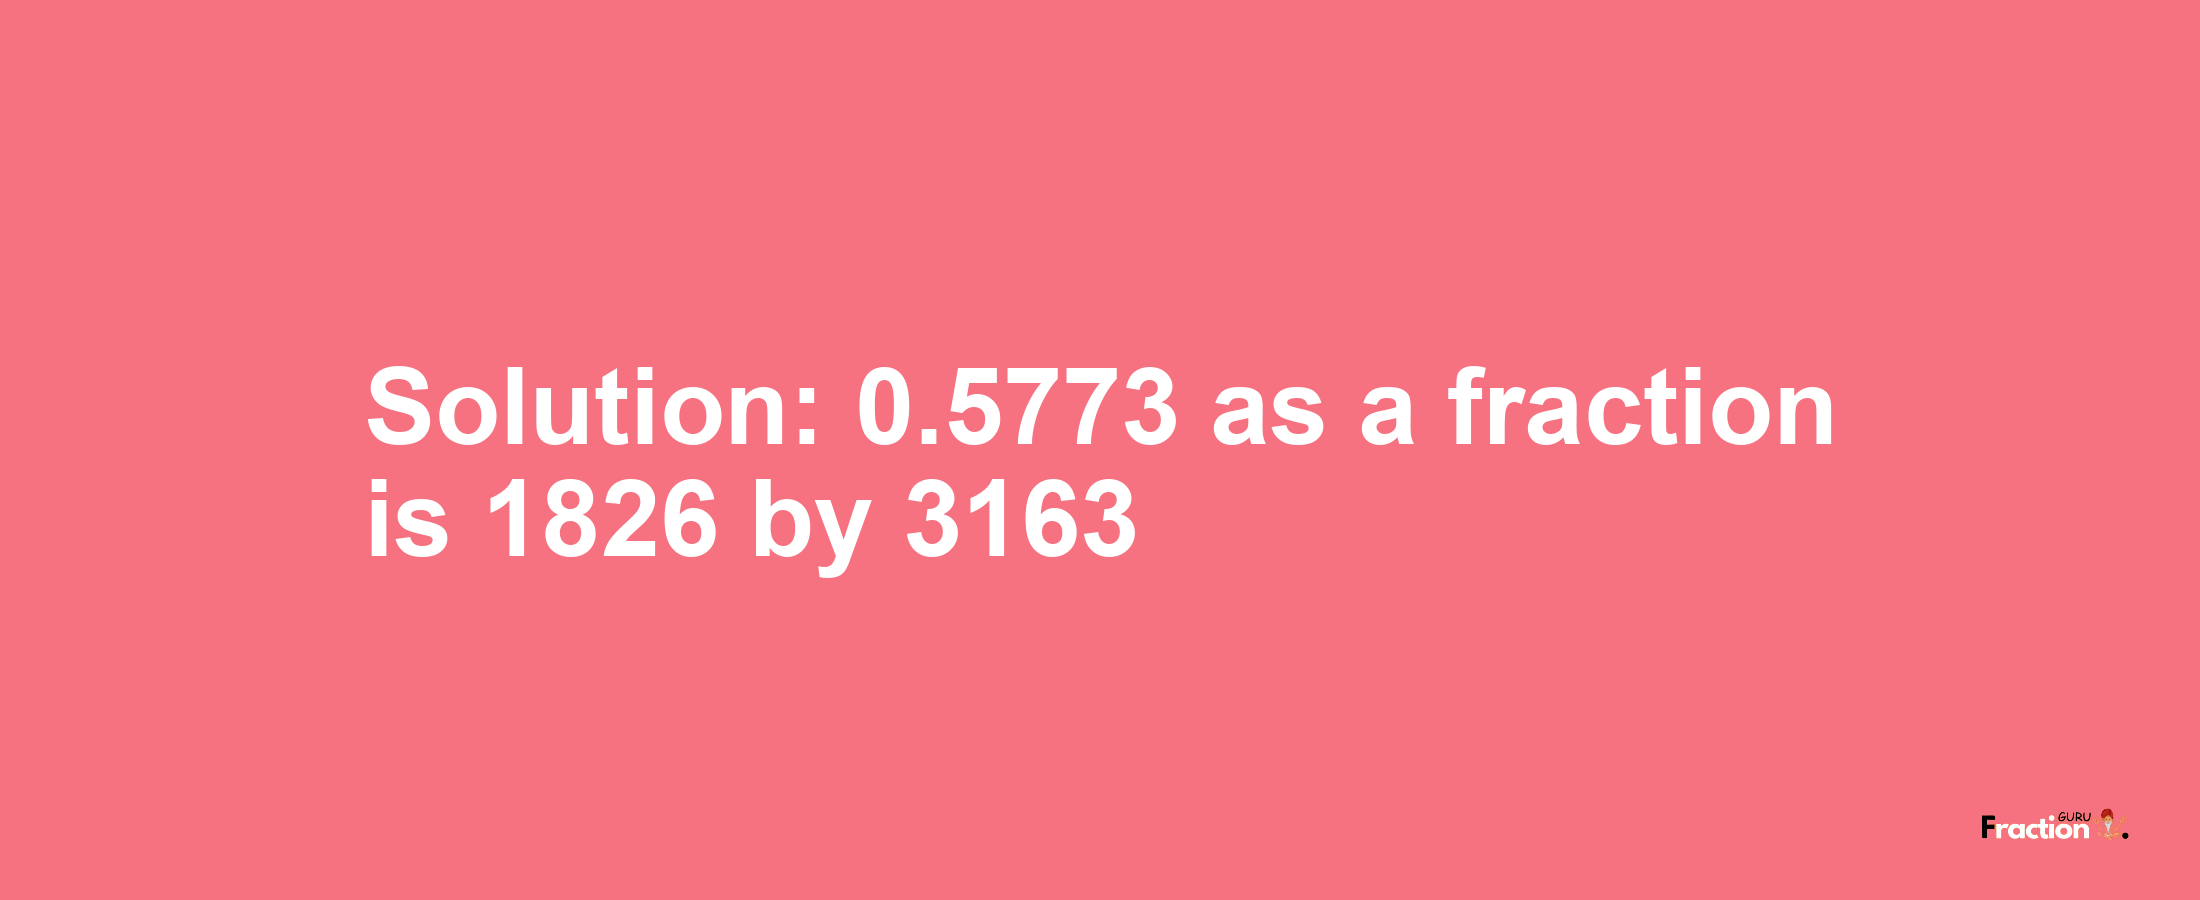 Solution:0.5773 as a fraction is 1826/3163